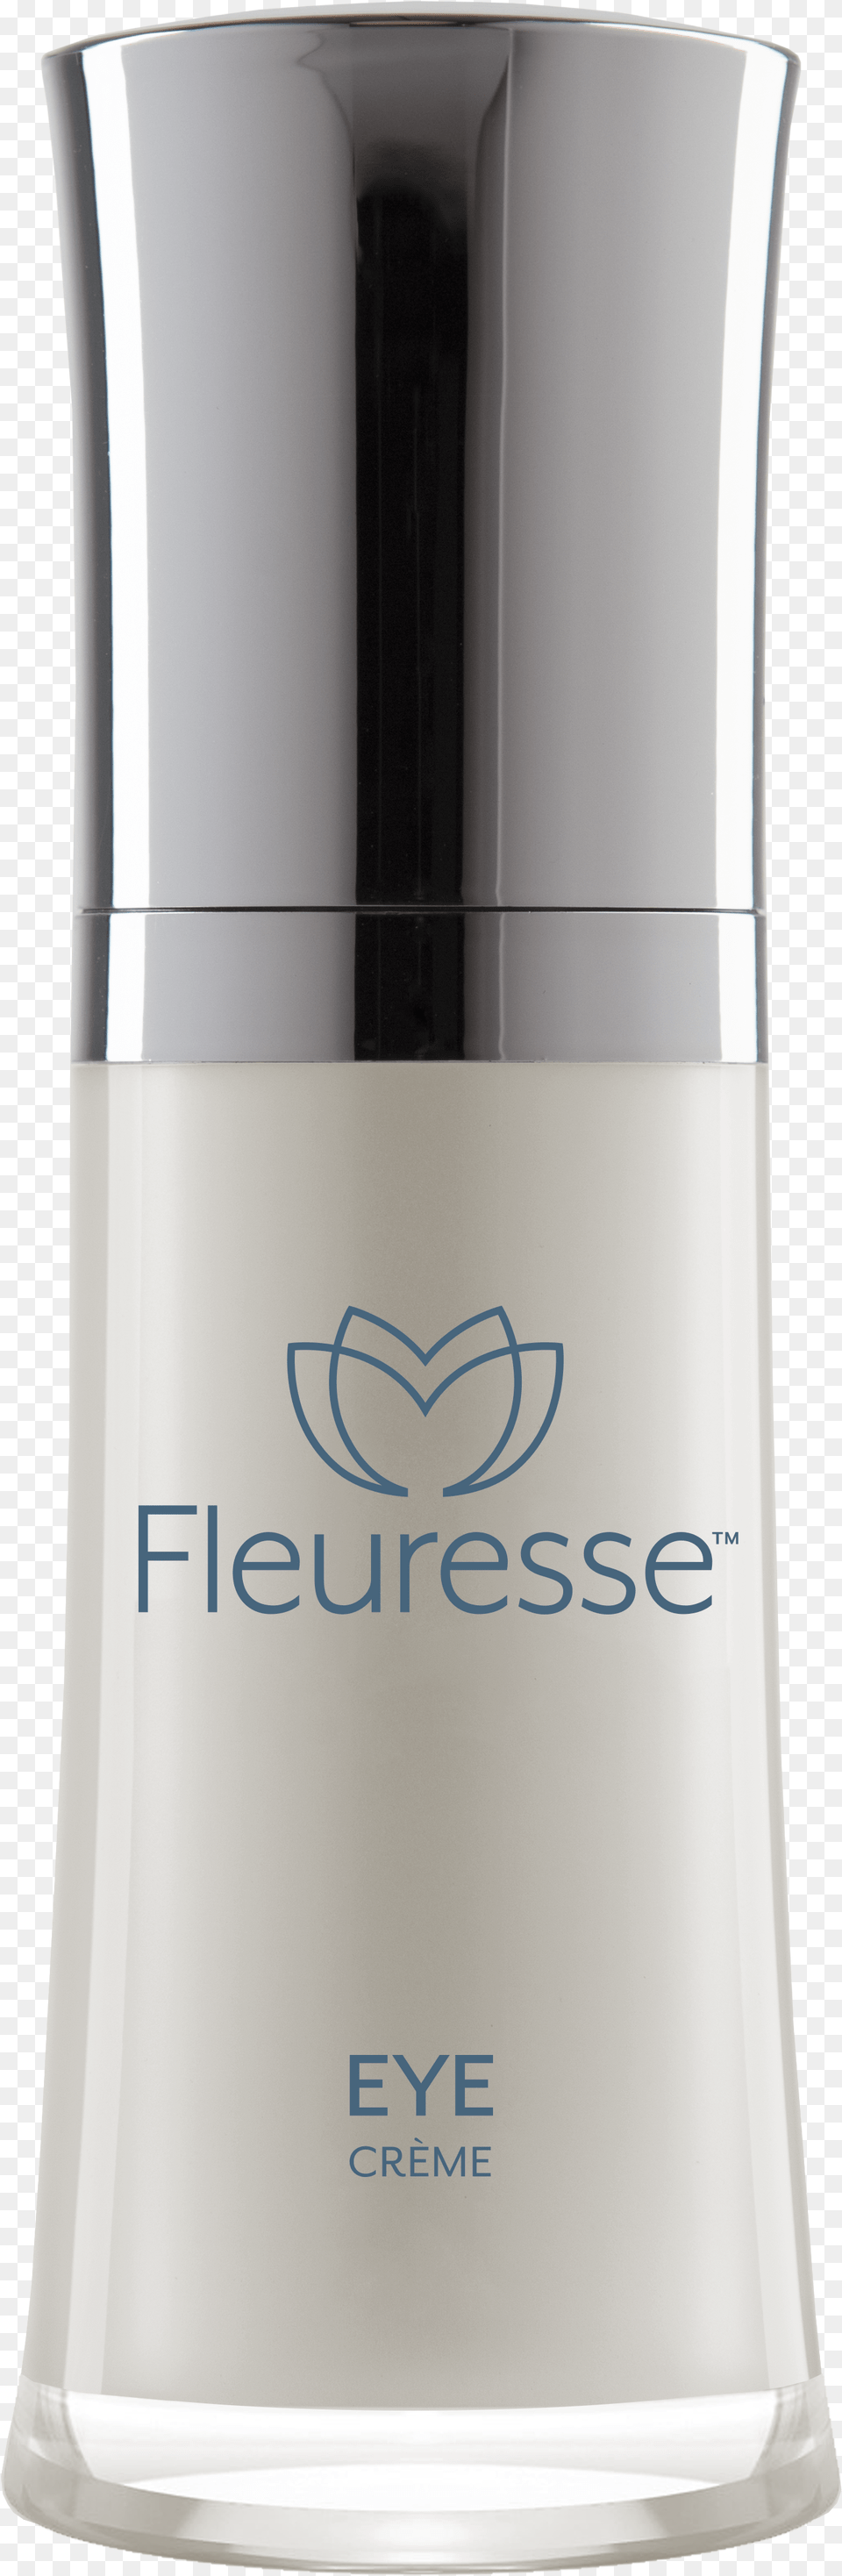 Fleuresse Eye Crme Uses Naturally Occurring Botanicals Perfume, Bottle, Lotion, Cosmetics, Can Png Image